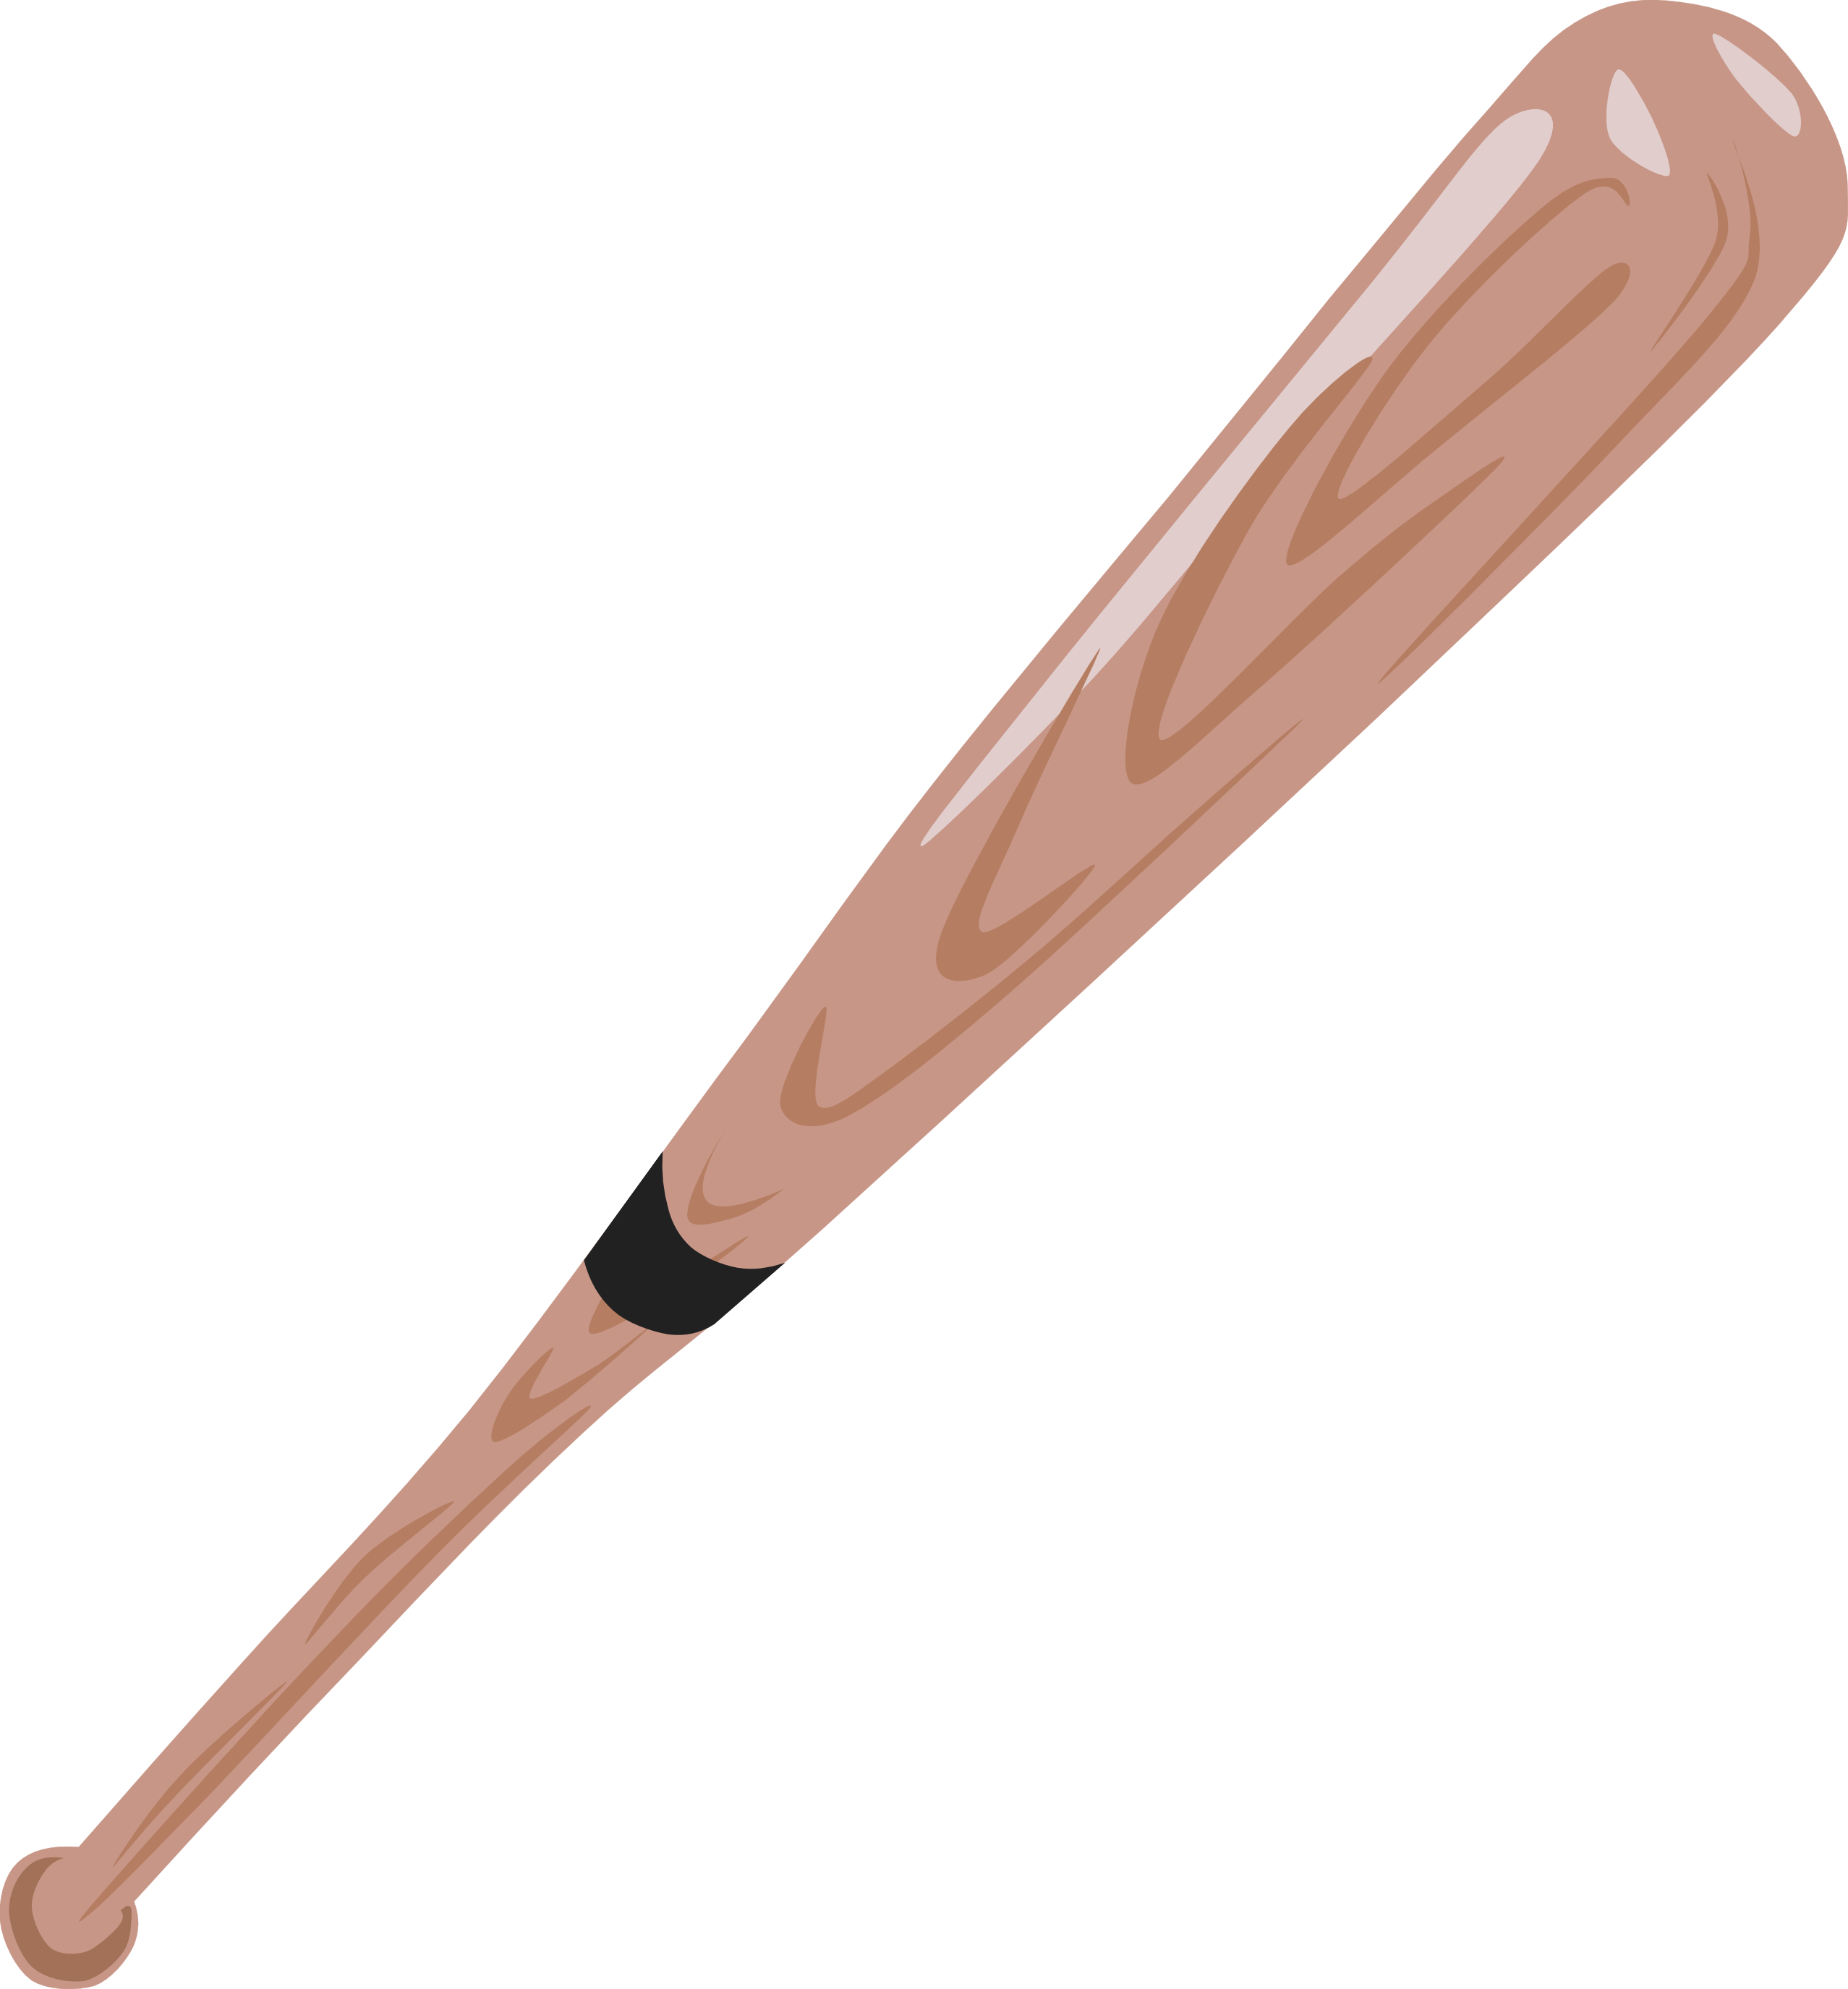 Crossed baseball bat clipart free clipart images 3